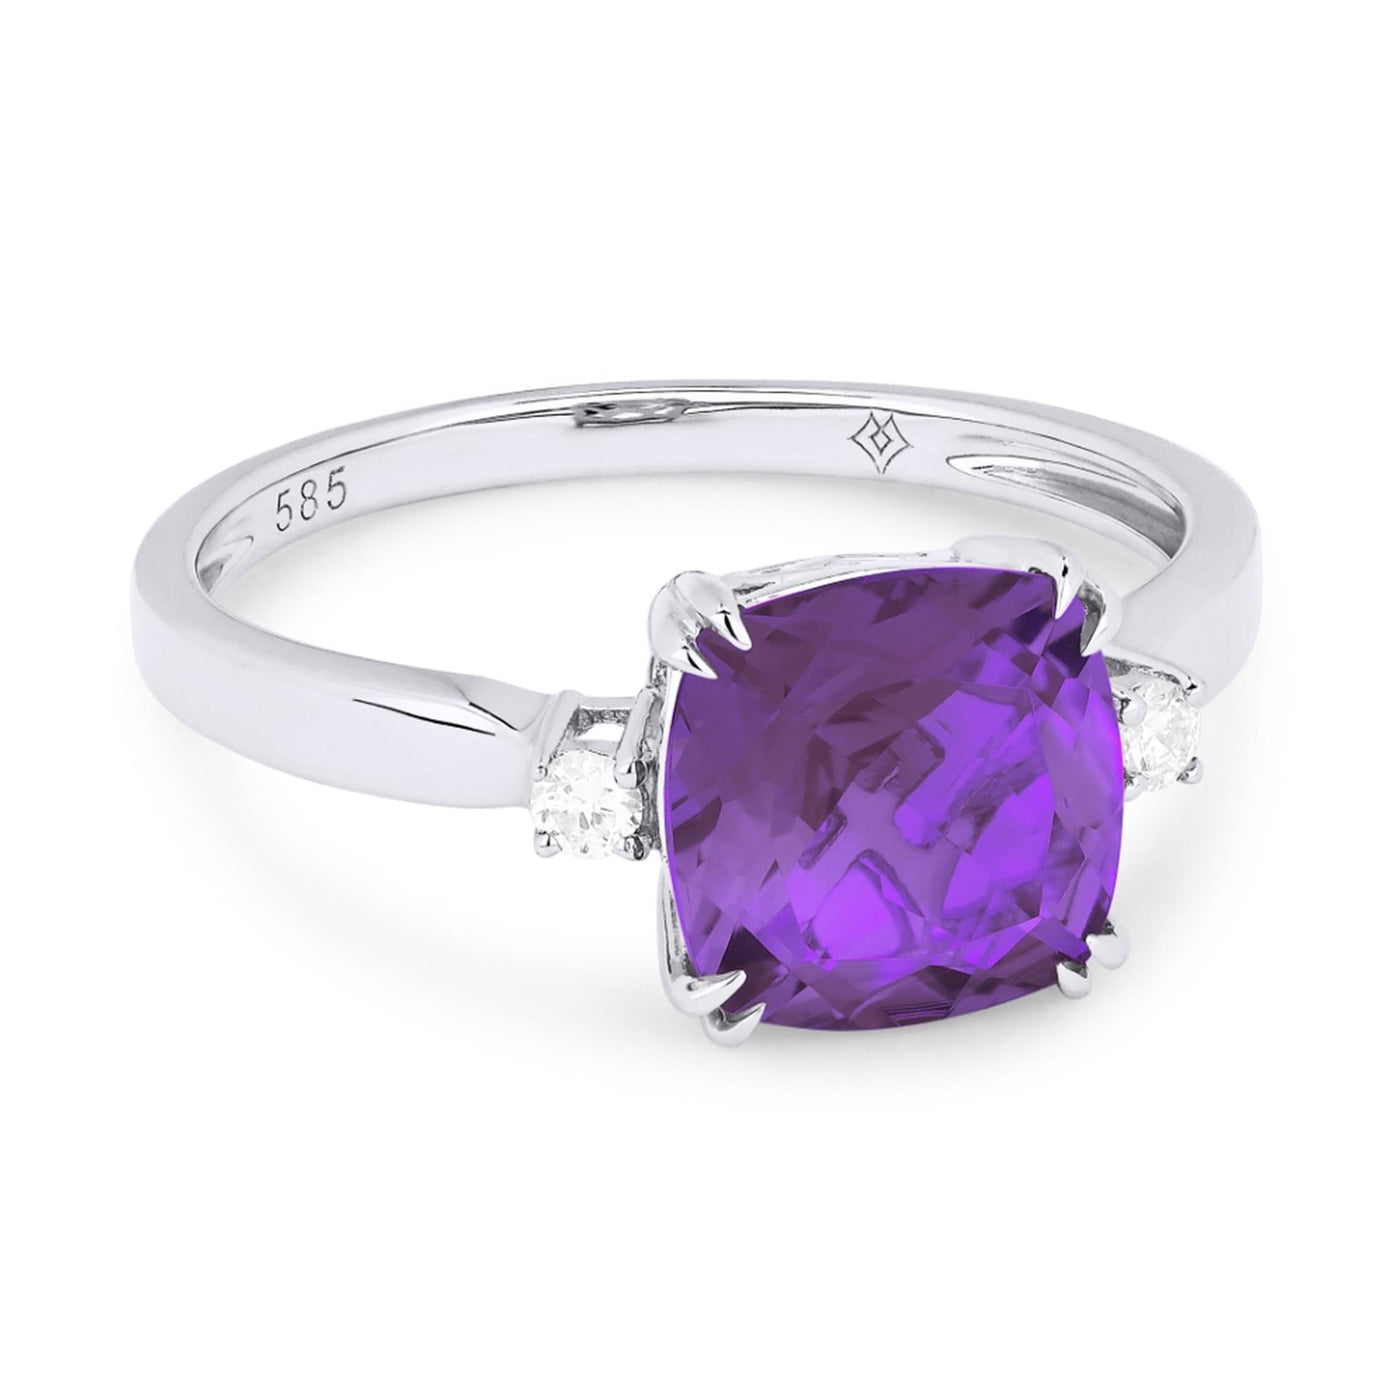 Madison L 14K White Gold 2.39ctw Halo Style Amethyst and Diamonds Ring